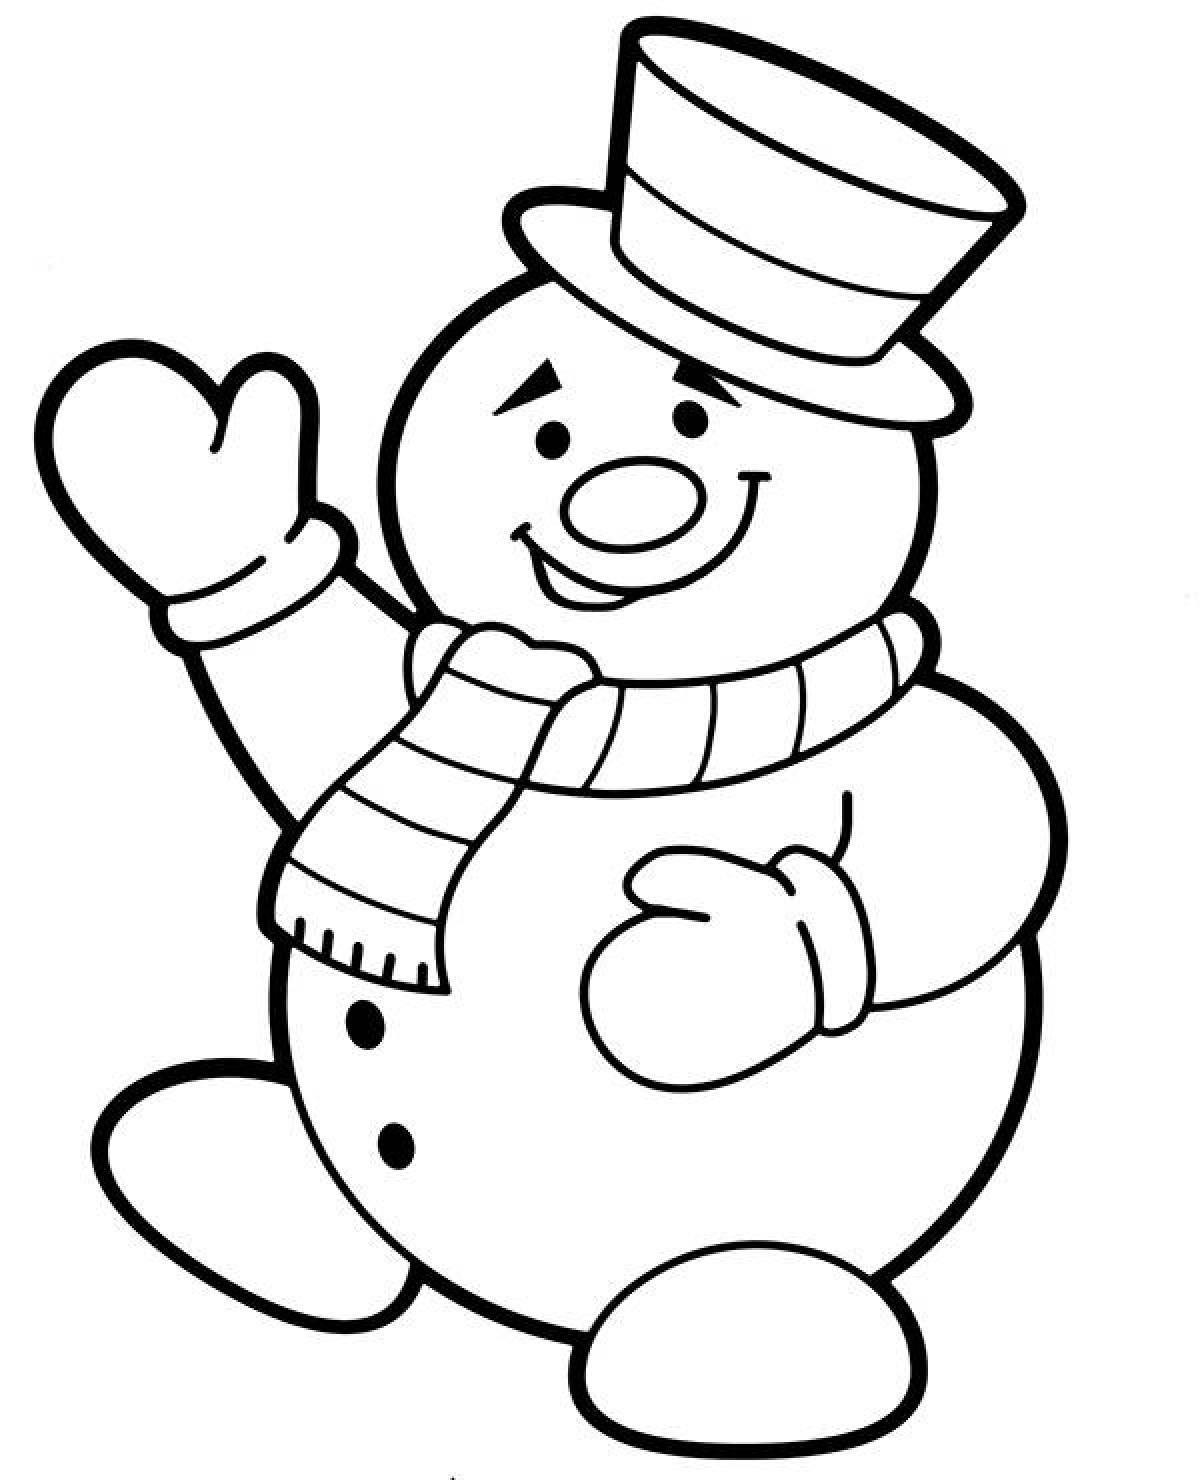 Sparkling snowman coloring book for kids